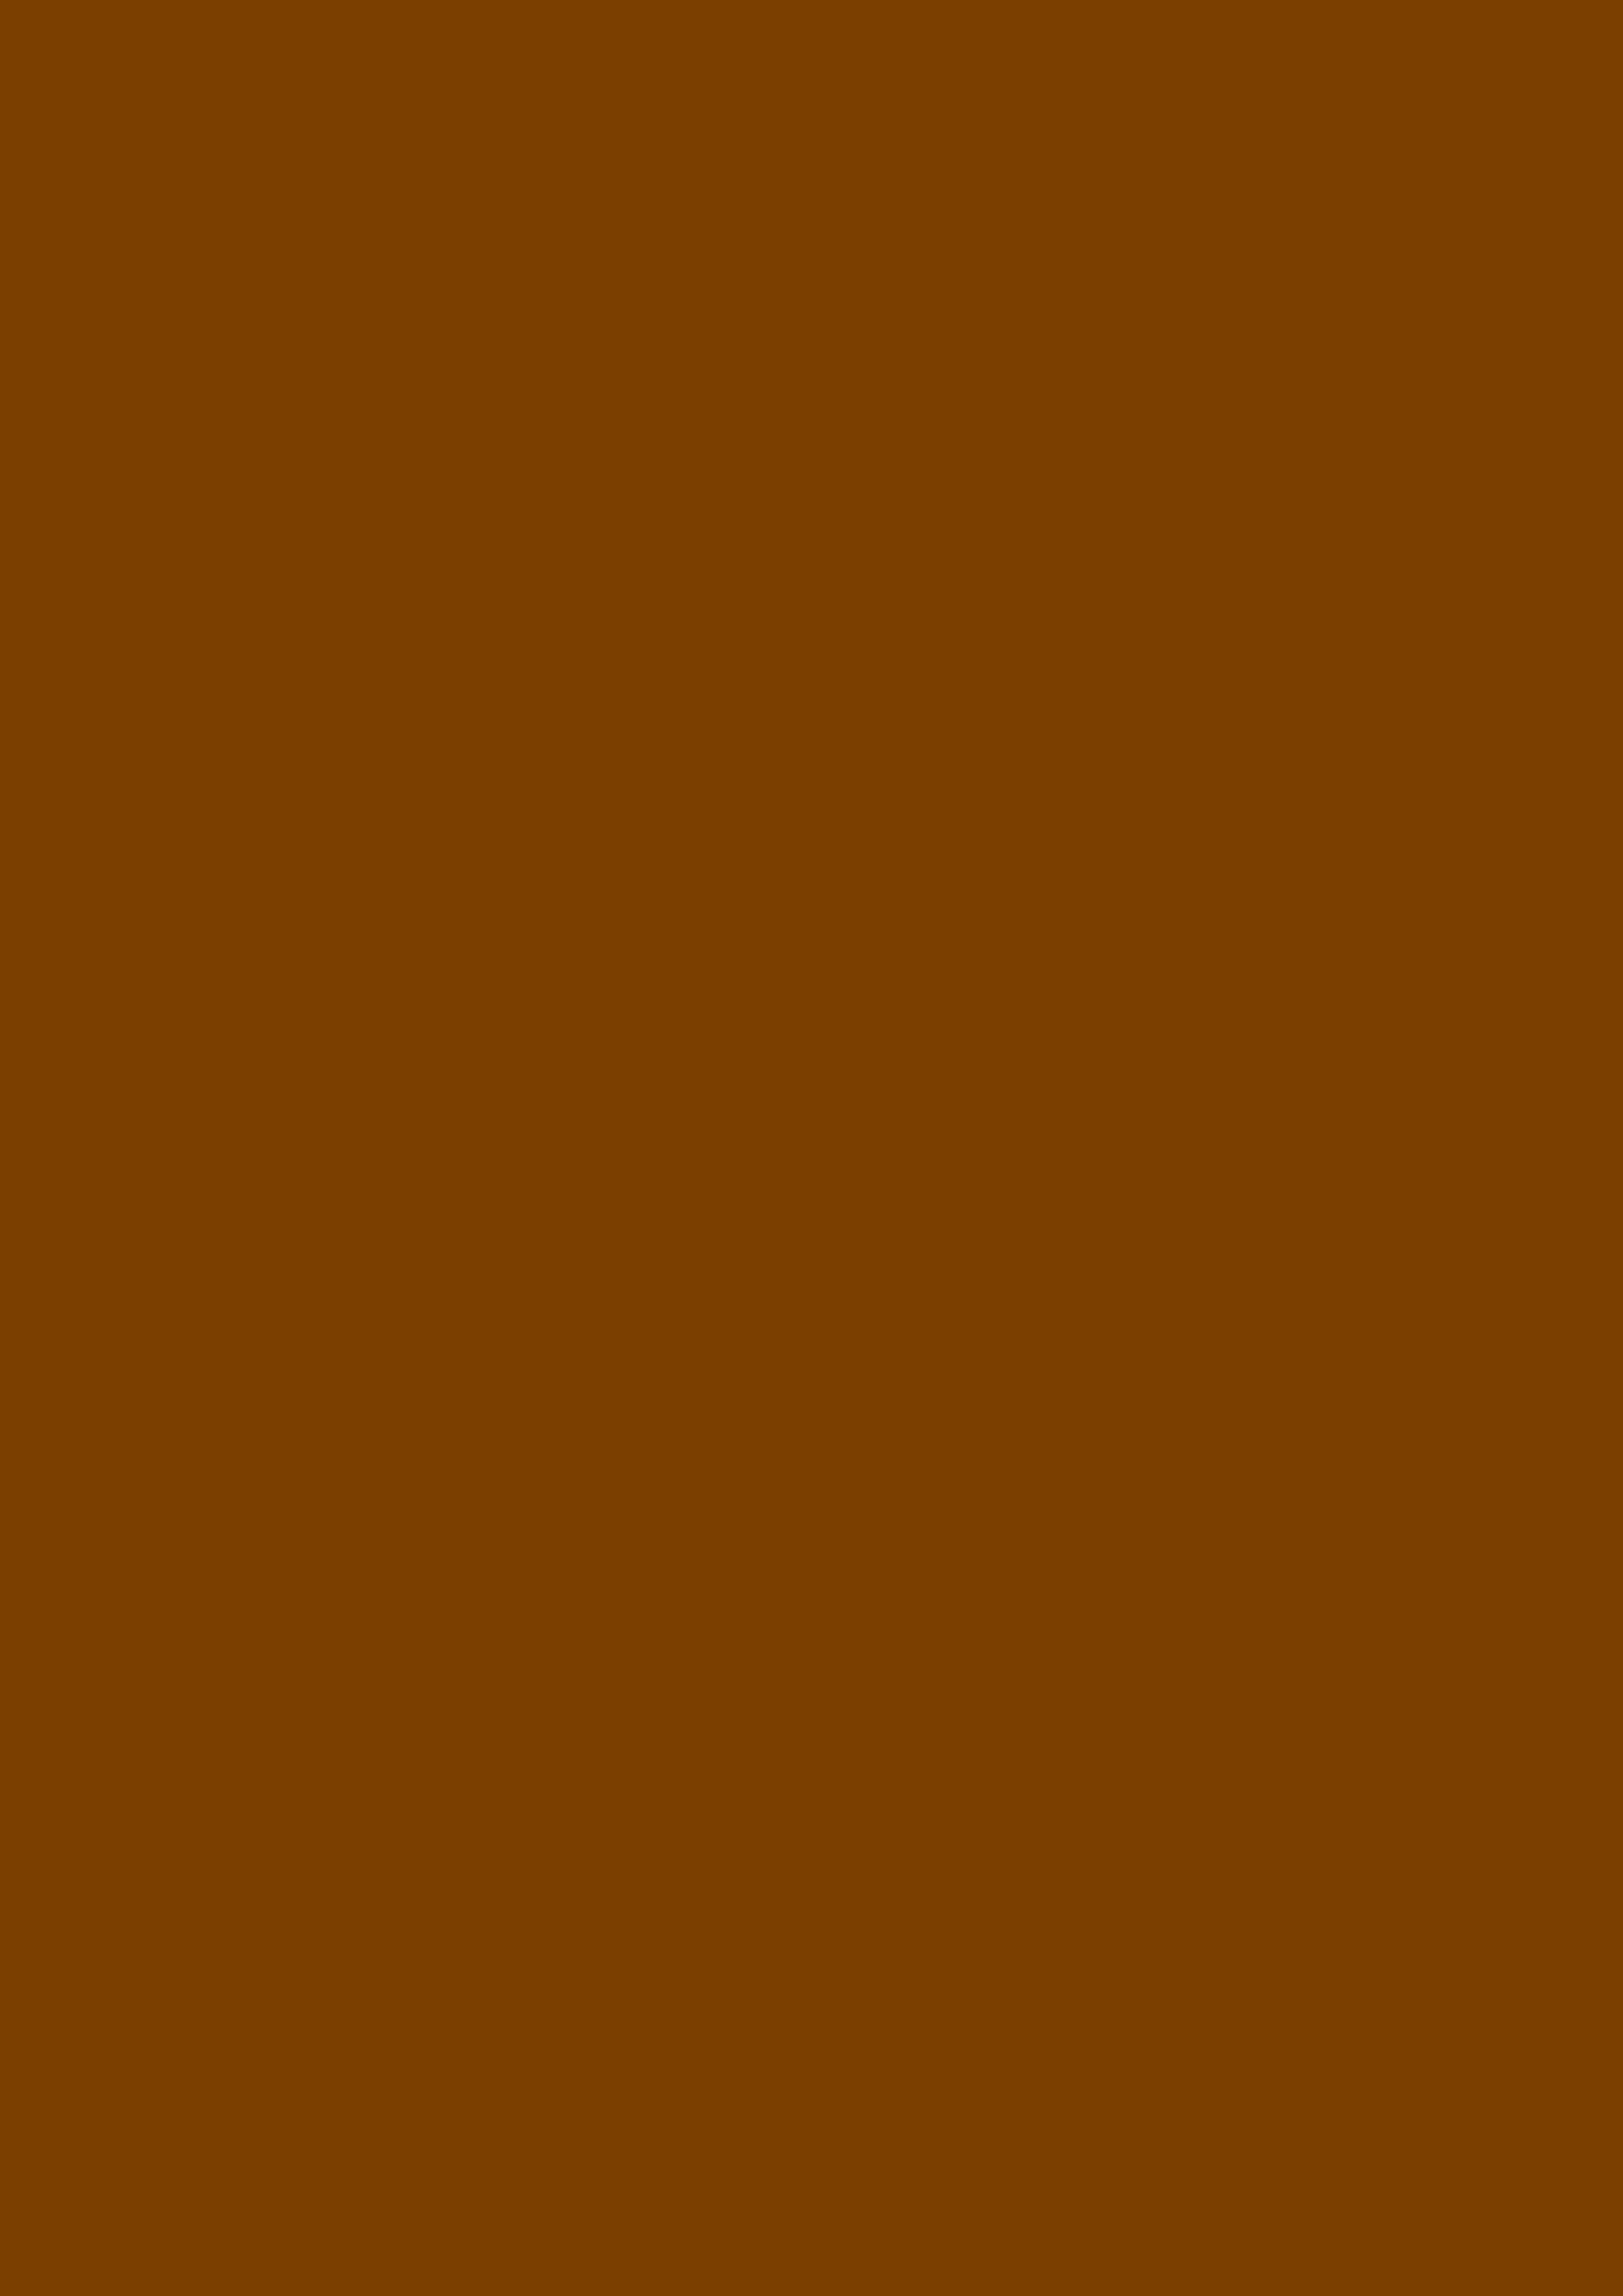 2480x3508 Chocolate Traditional Solid Color Background